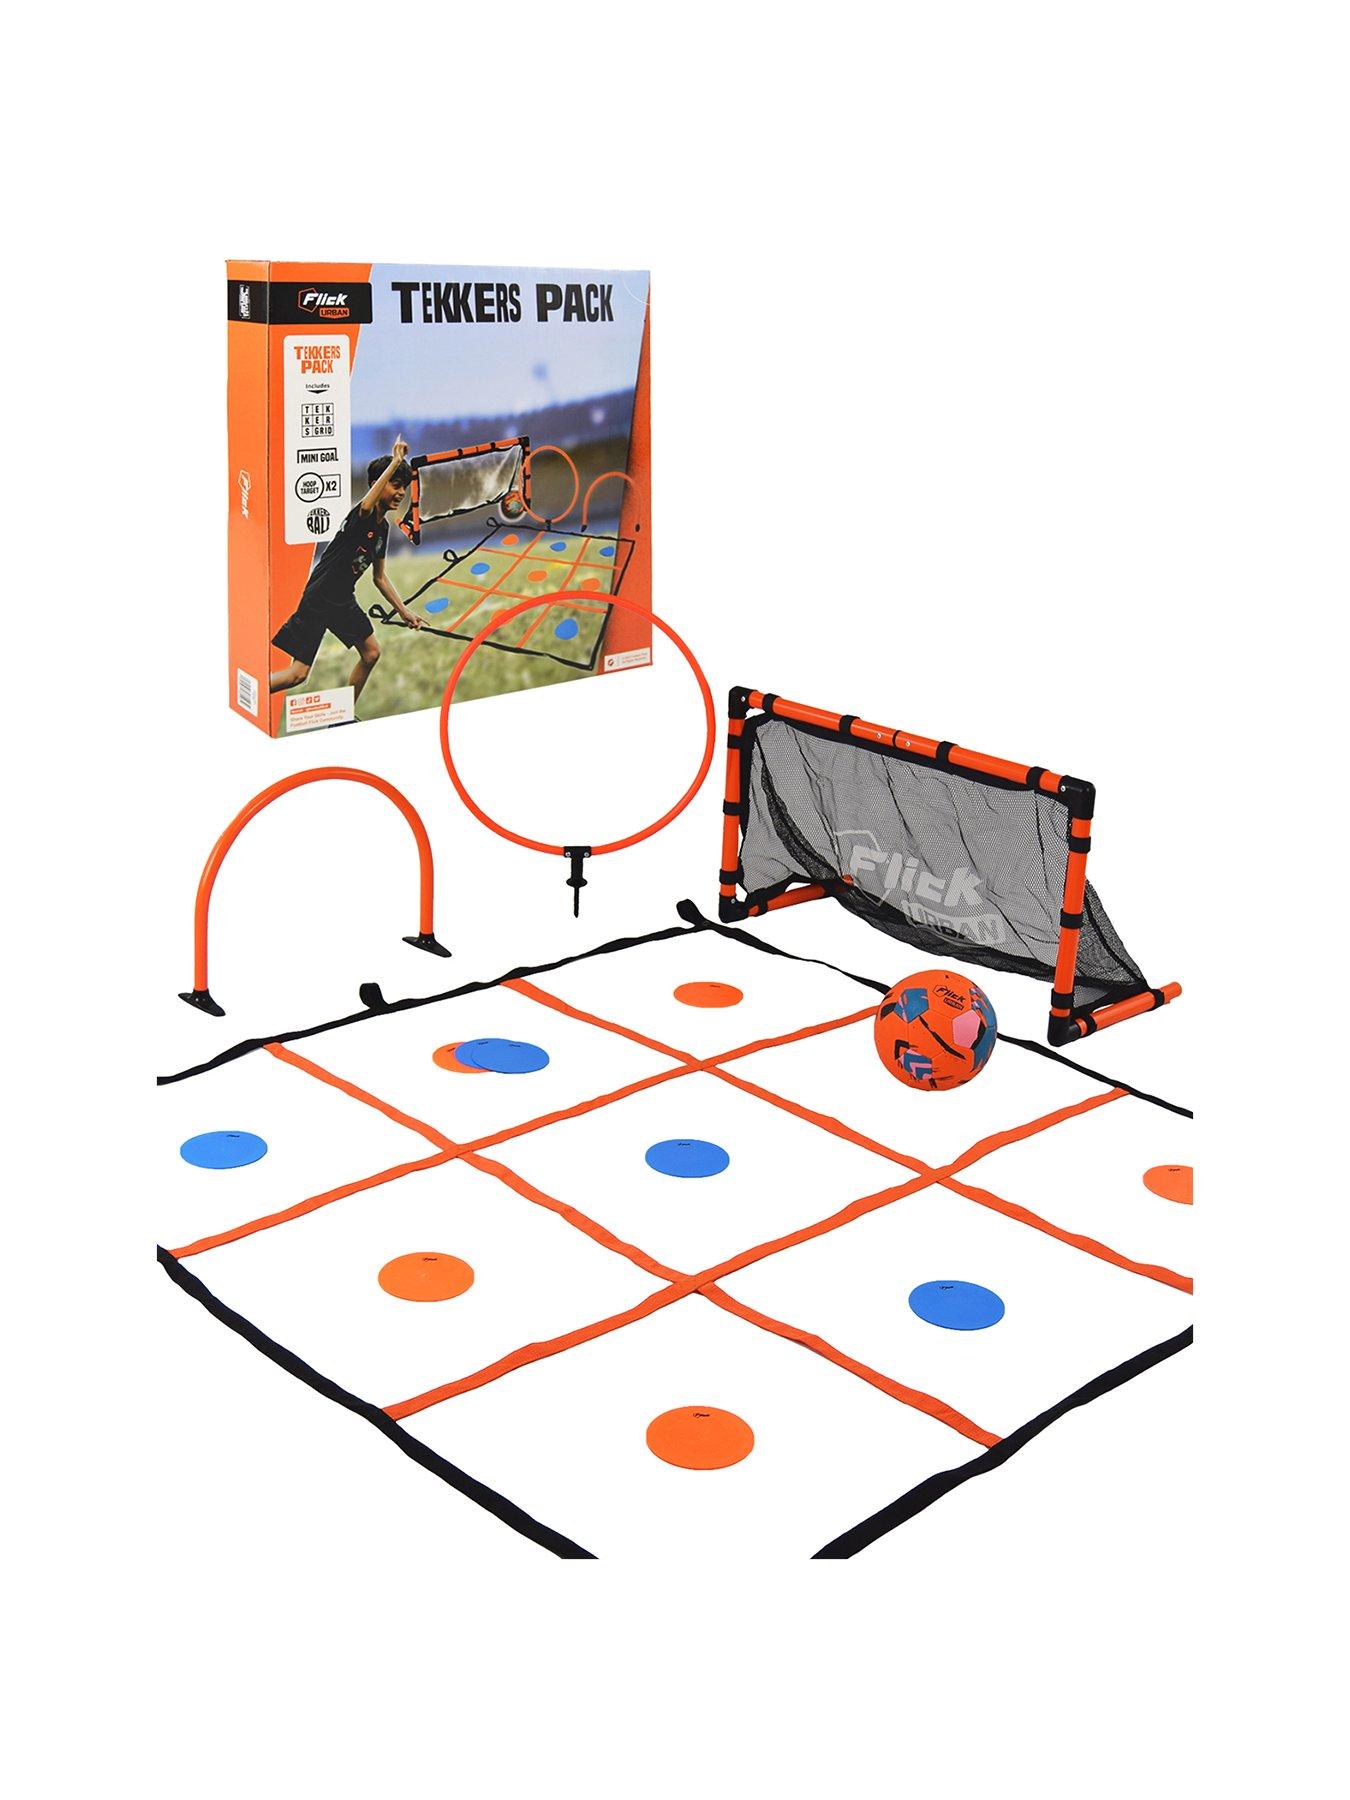 Tic-Tac-Toe Football and Other Games to Play With the Tekkers Pack! –  Football Flick